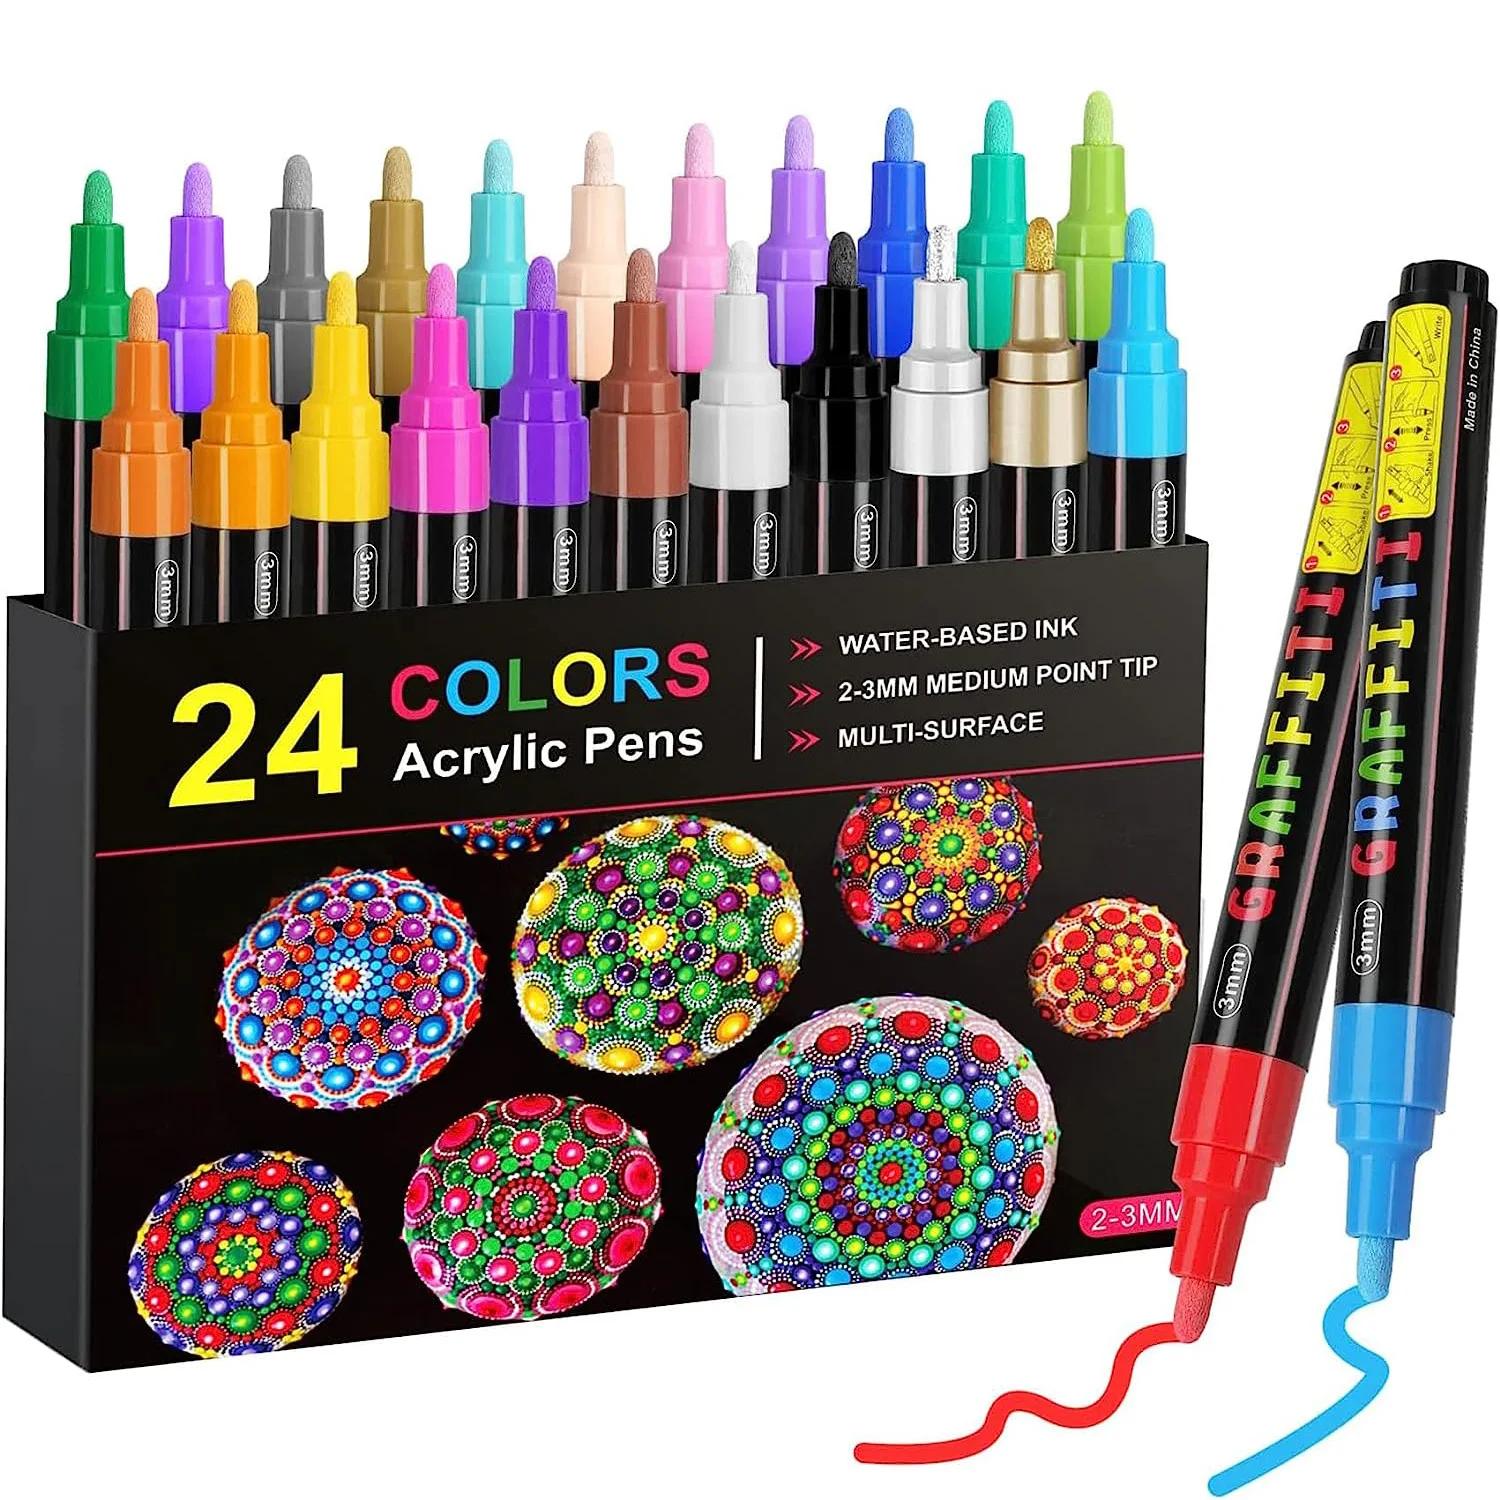 

Acrylic Paint Pens, Set of 12/18/24 Colors Paint Markers Pens for Rocks, Craft, Ceramic, Glass, Wood, -Art Crafting Supplies